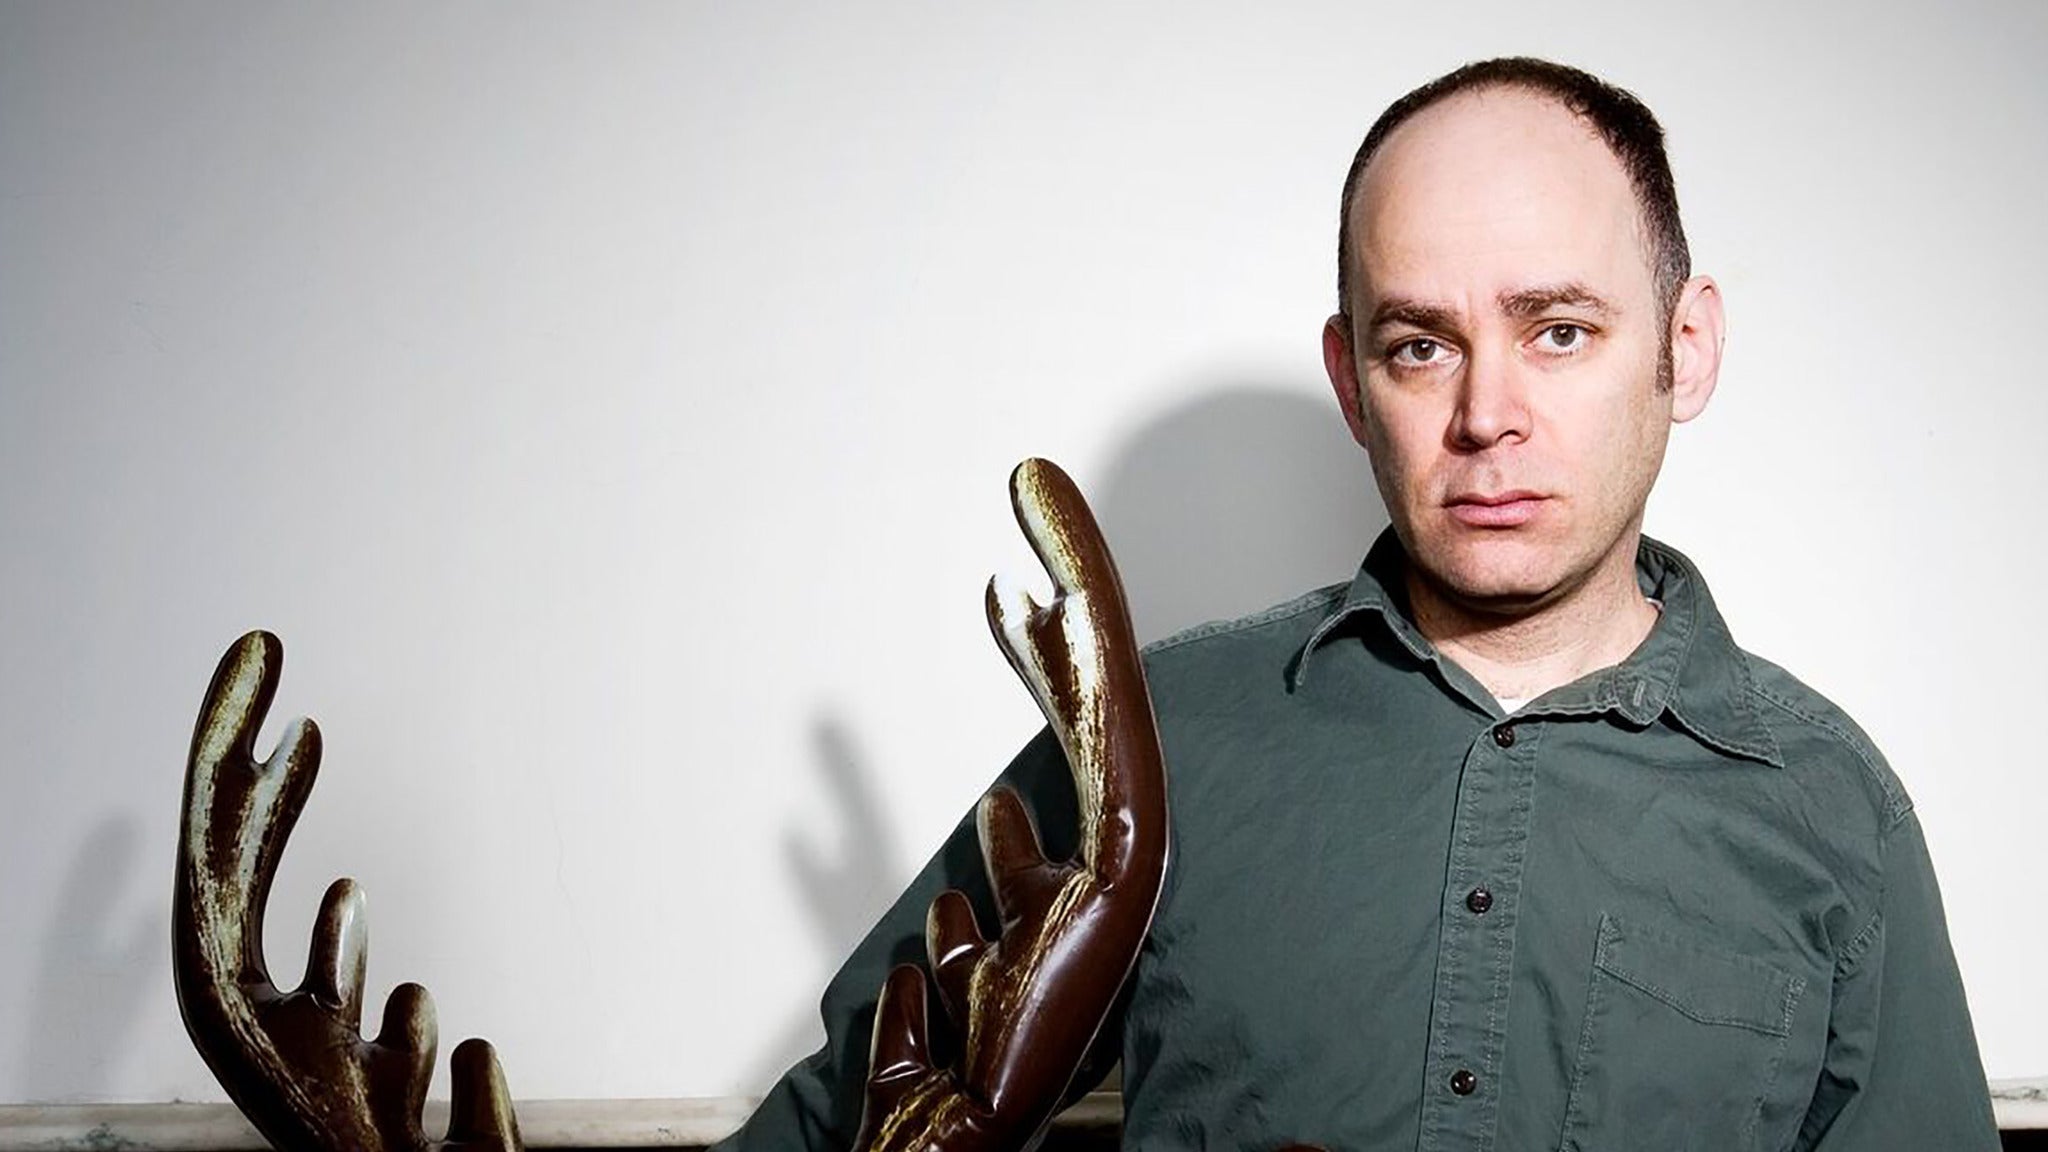 Image used with permission from Ticketmaster | Todd Barry tickets